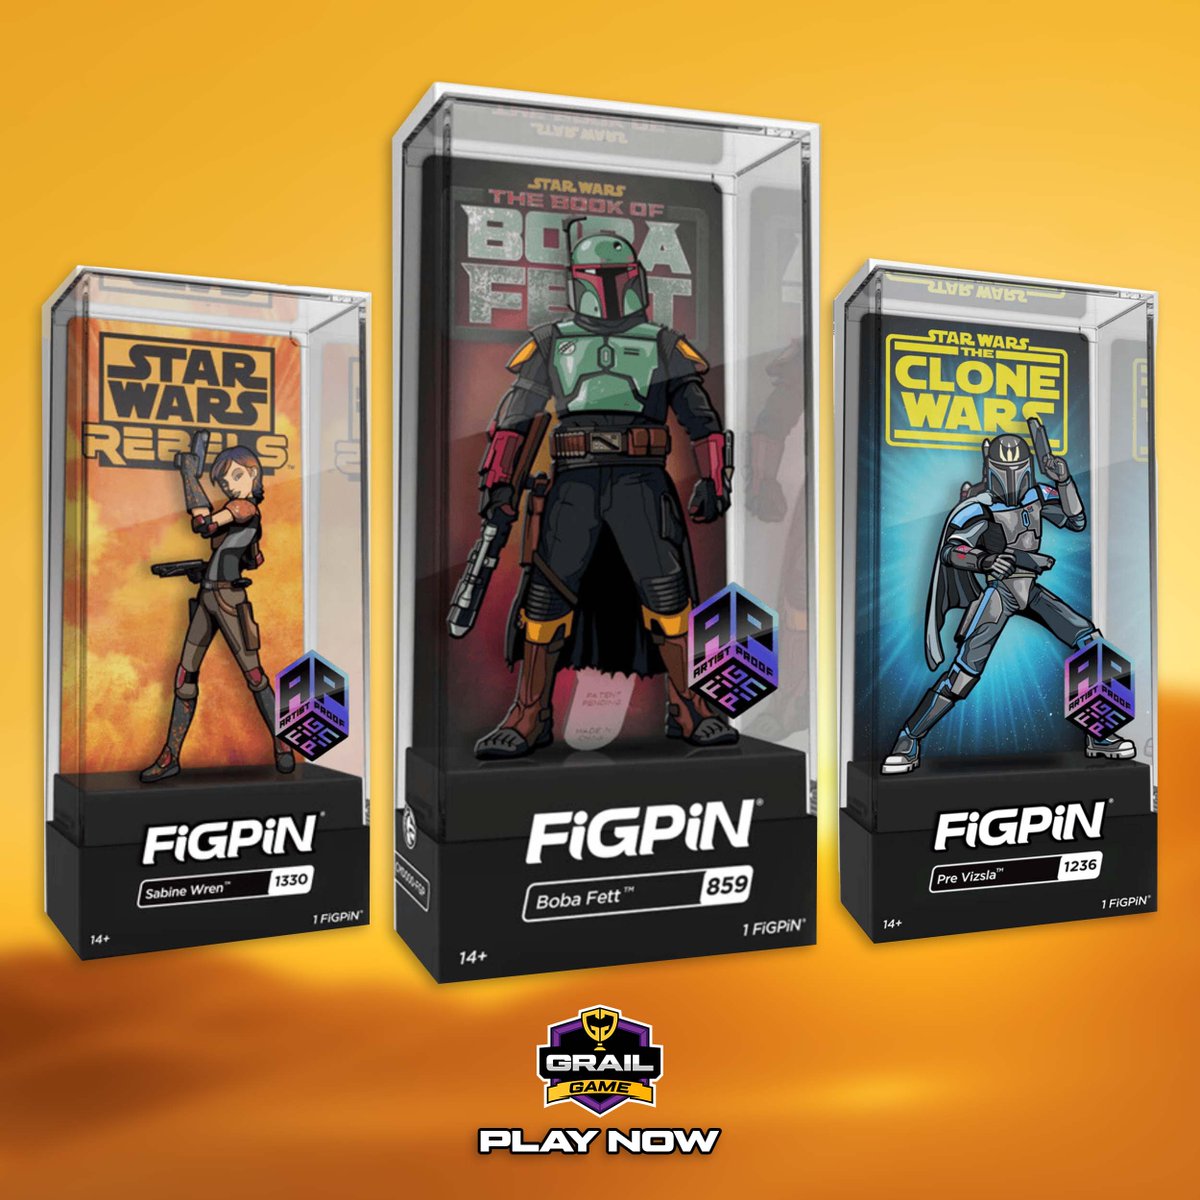 #GrailGamers! Star Wars Week FiGPiN AP Hunt #MysteryBox Game Still has Plenty of Top Hits!
⁠
Strap into your X-Wing and navigate your way through this #FiGPiN Mystery Box on your quest to find one of FIVE rare Star Wars Artis Proofs, including the top hit which is everybody's…